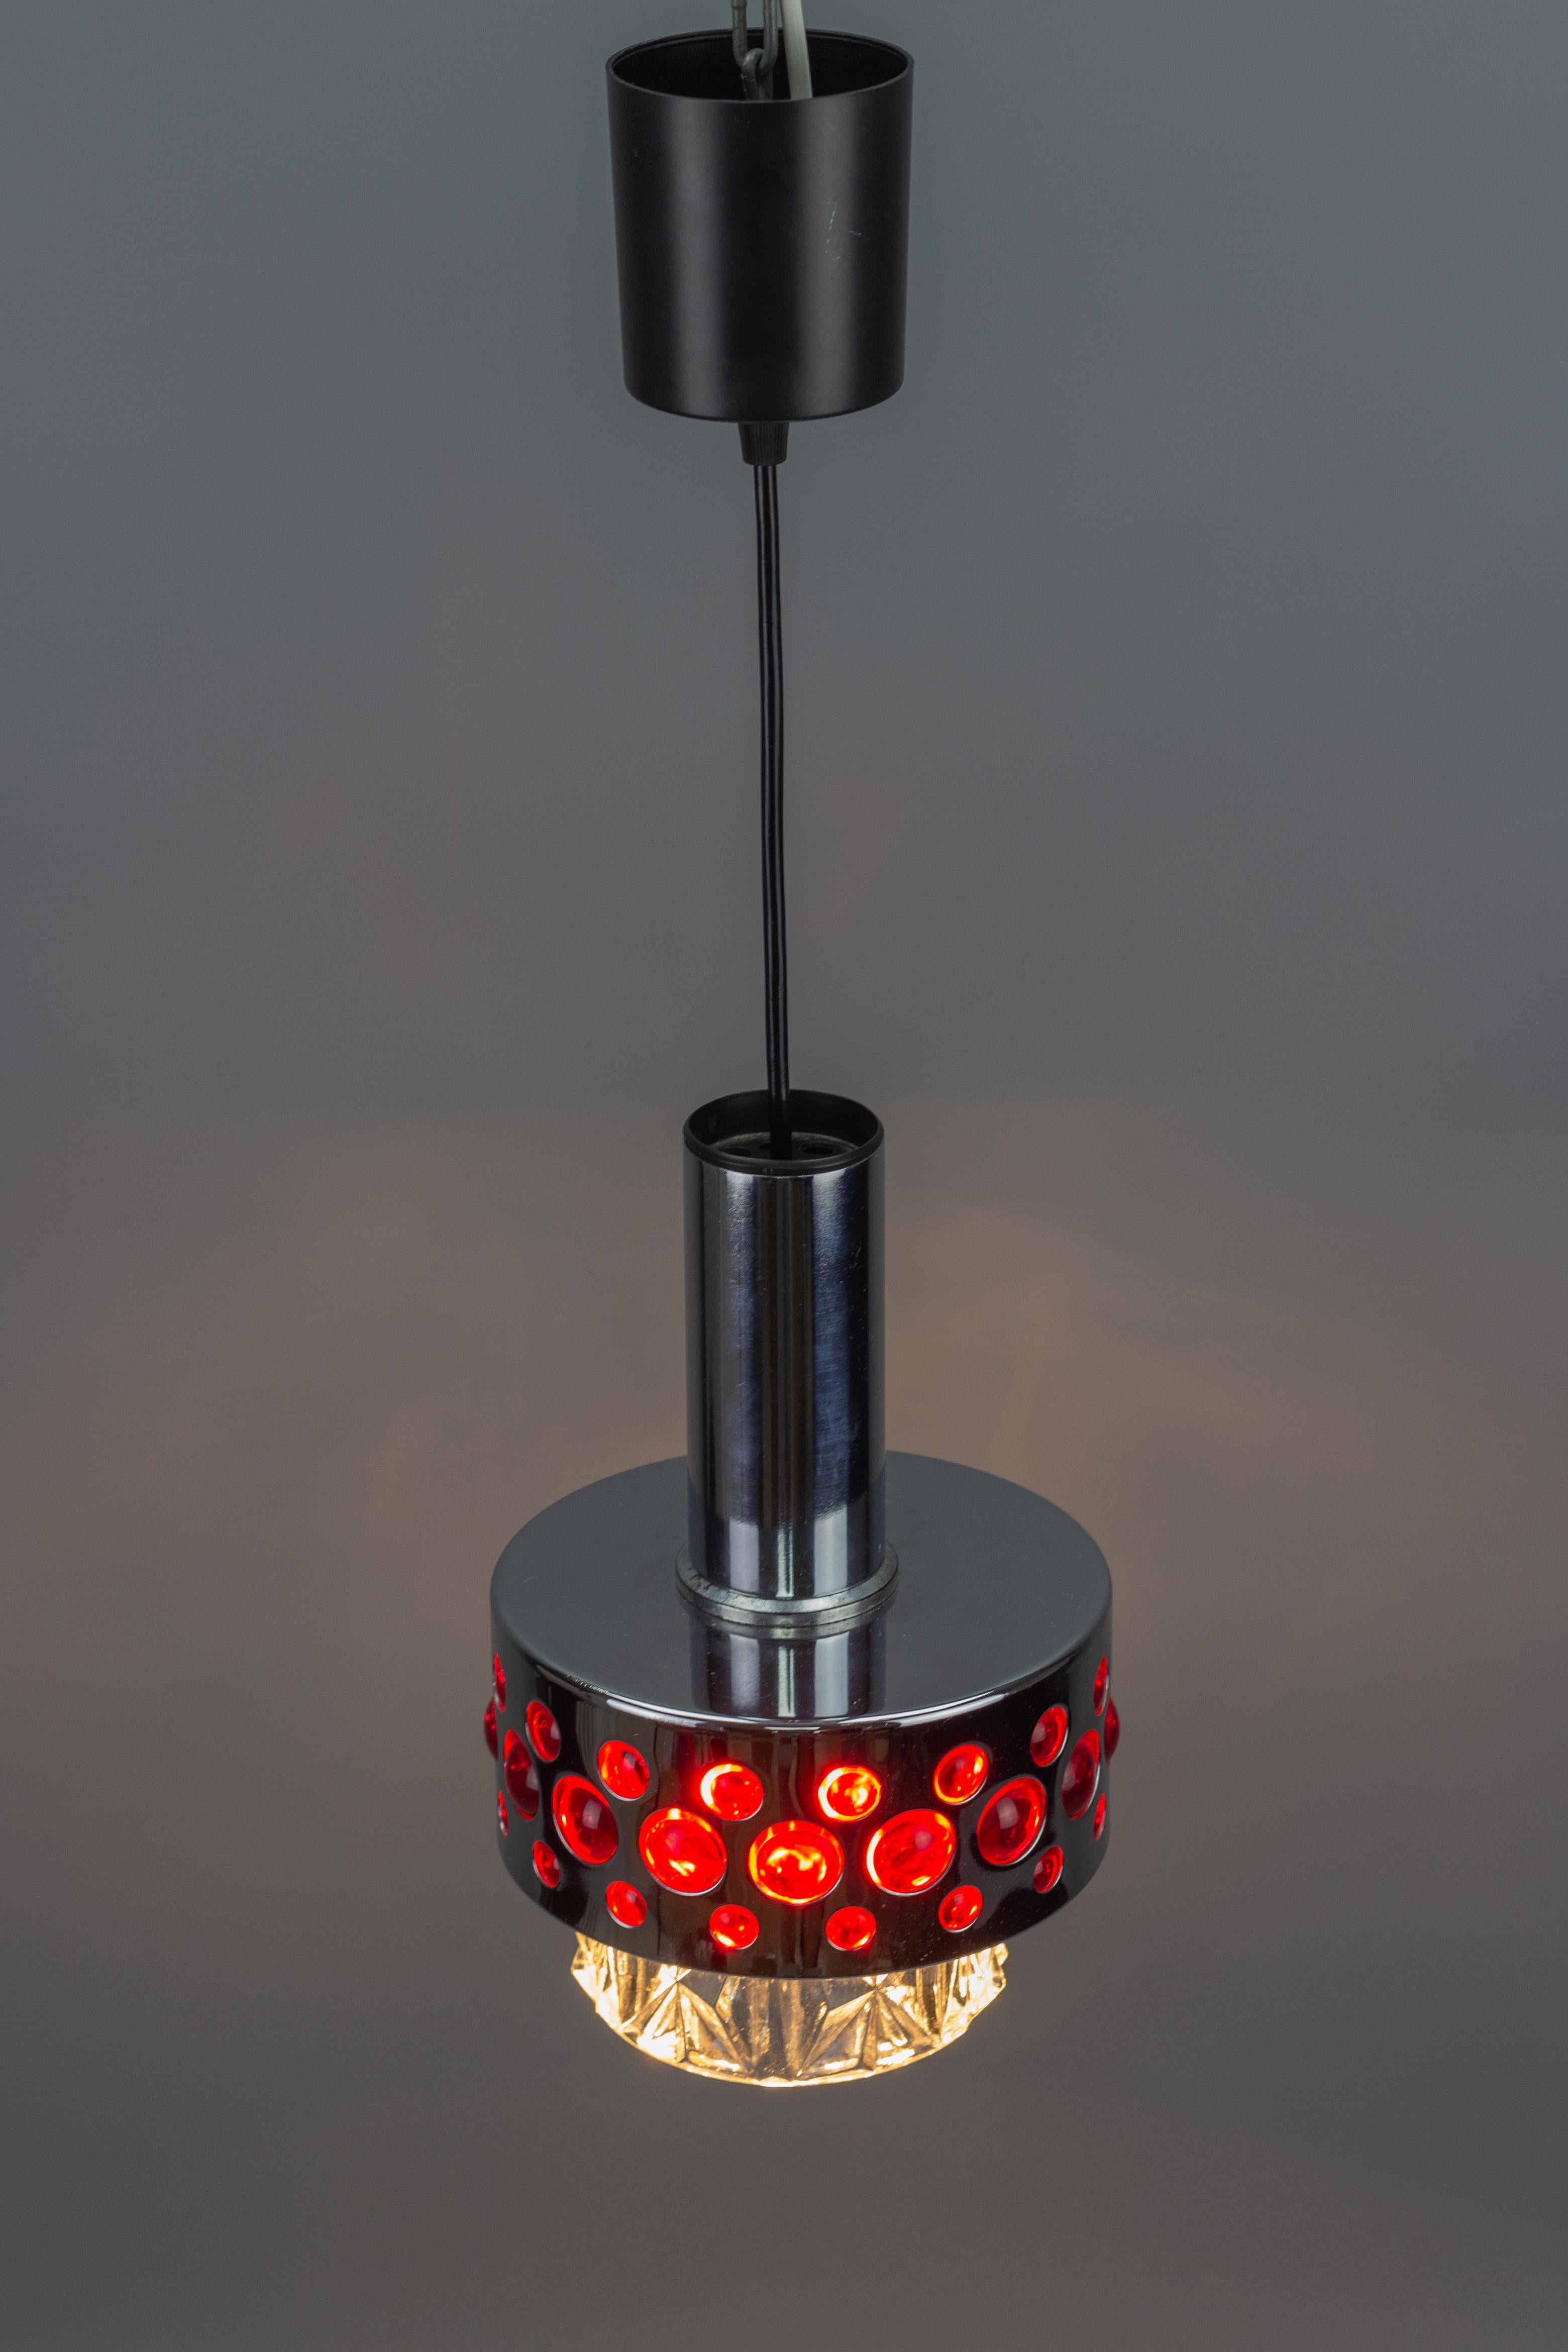 German Mid-Century Modern Chrome and Red Pendant Light by Richard Essig, 1970s For Sale 2